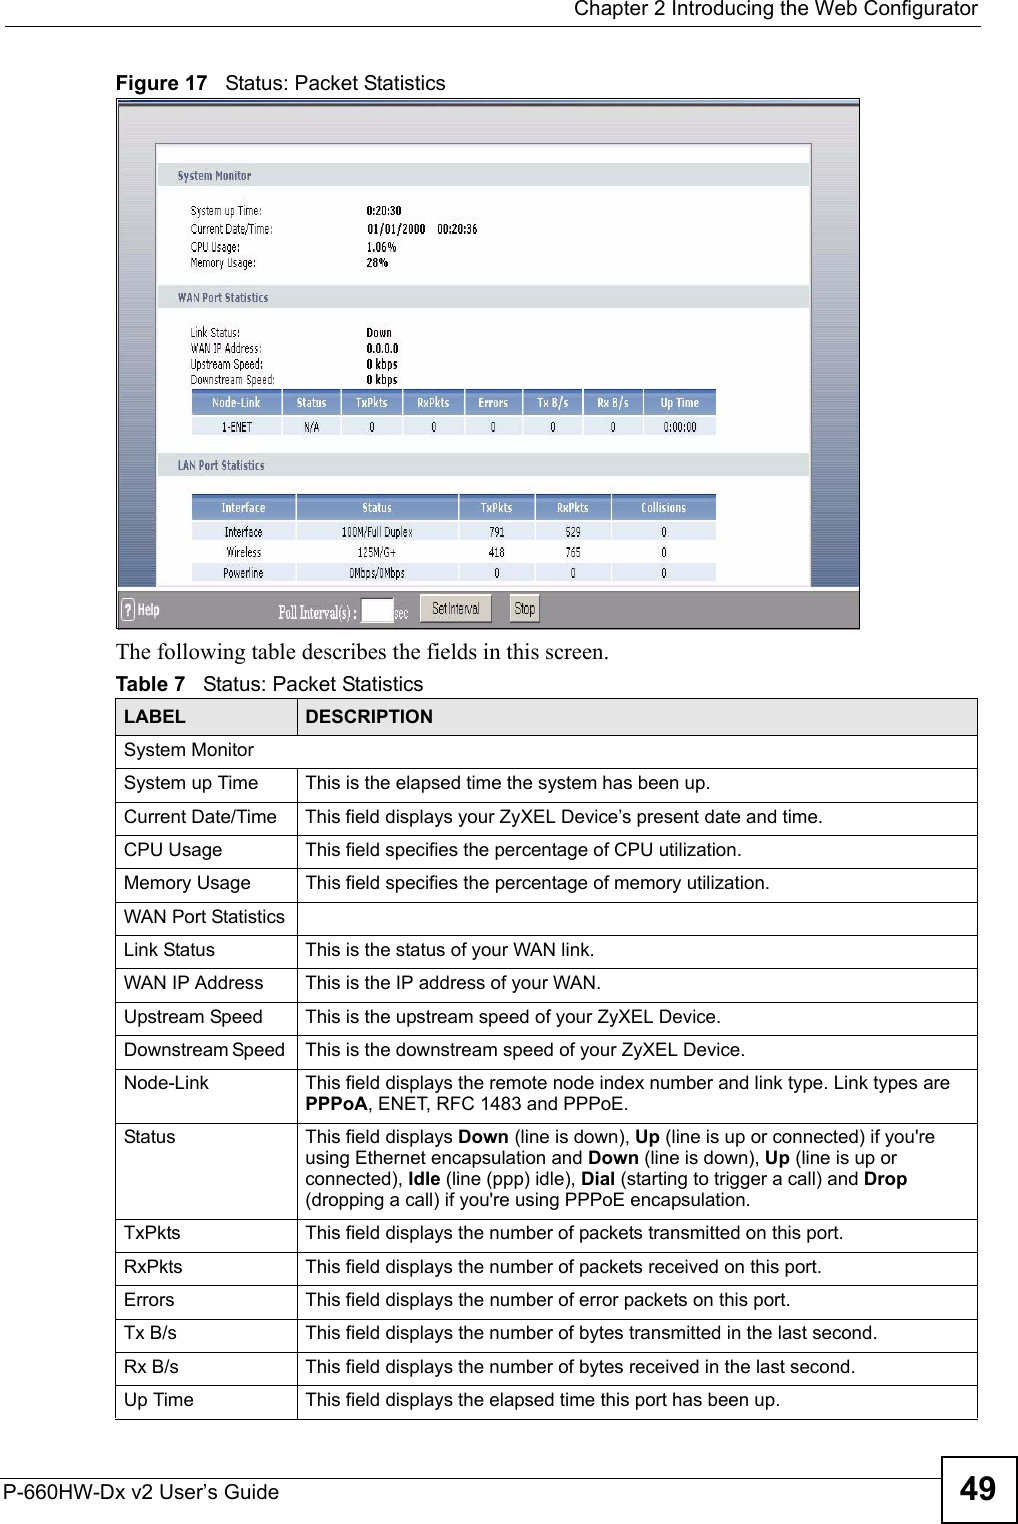  Chapter 2 Introducing the Web ConfiguratorP-660HW-Dx v2 User’s Guide 49Figure 17   Status: Packet StatisticsThe following table describes the fields in this screen.  Table 7   Status: Packet StatisticsLABEL DESCRIPTIONSystem MonitorSystem up Time This is the elapsed time the system has been up.Current Date/Time This field displays your ZyXEL Device’s present date and time.CPU Usage This field specifies the percentage of CPU utilization.Memory Usage This field specifies the percentage of memory utilization. WAN Port StatisticsLink Status This is the status of your WAN link.WAN IP Address This is the IP address of your WAN.Upstream Speed This is the upstream speed of your ZyXEL Device.Downstream Speed  This is the downstream speed of your ZyXEL Device.Node-Link This field displays the remote node index number and link type. Link types are PPPoA, ENET, RFC 1483 and PPPoE.Status  This field displays Down (line is down), Up (line is up or connected) if you&apos;re using Ethernet encapsulation and Down (line is down), Up (line is up or connected), Idle (line (ppp) idle), Dial (starting to trigger a call) and Drop (dropping a call) if you&apos;re using PPPoE encapsulation.TxPkts  This field displays the number of packets transmitted on this port.RxPkts  This field displays the number of packets received on this port.Errors This field displays the number of error packets on this port. Tx B/s  This field displays the number of bytes transmitted in the last second.Rx B/s This field displays the number of bytes received in the last second.Up Time  This field displays the elapsed time this port has been up. 